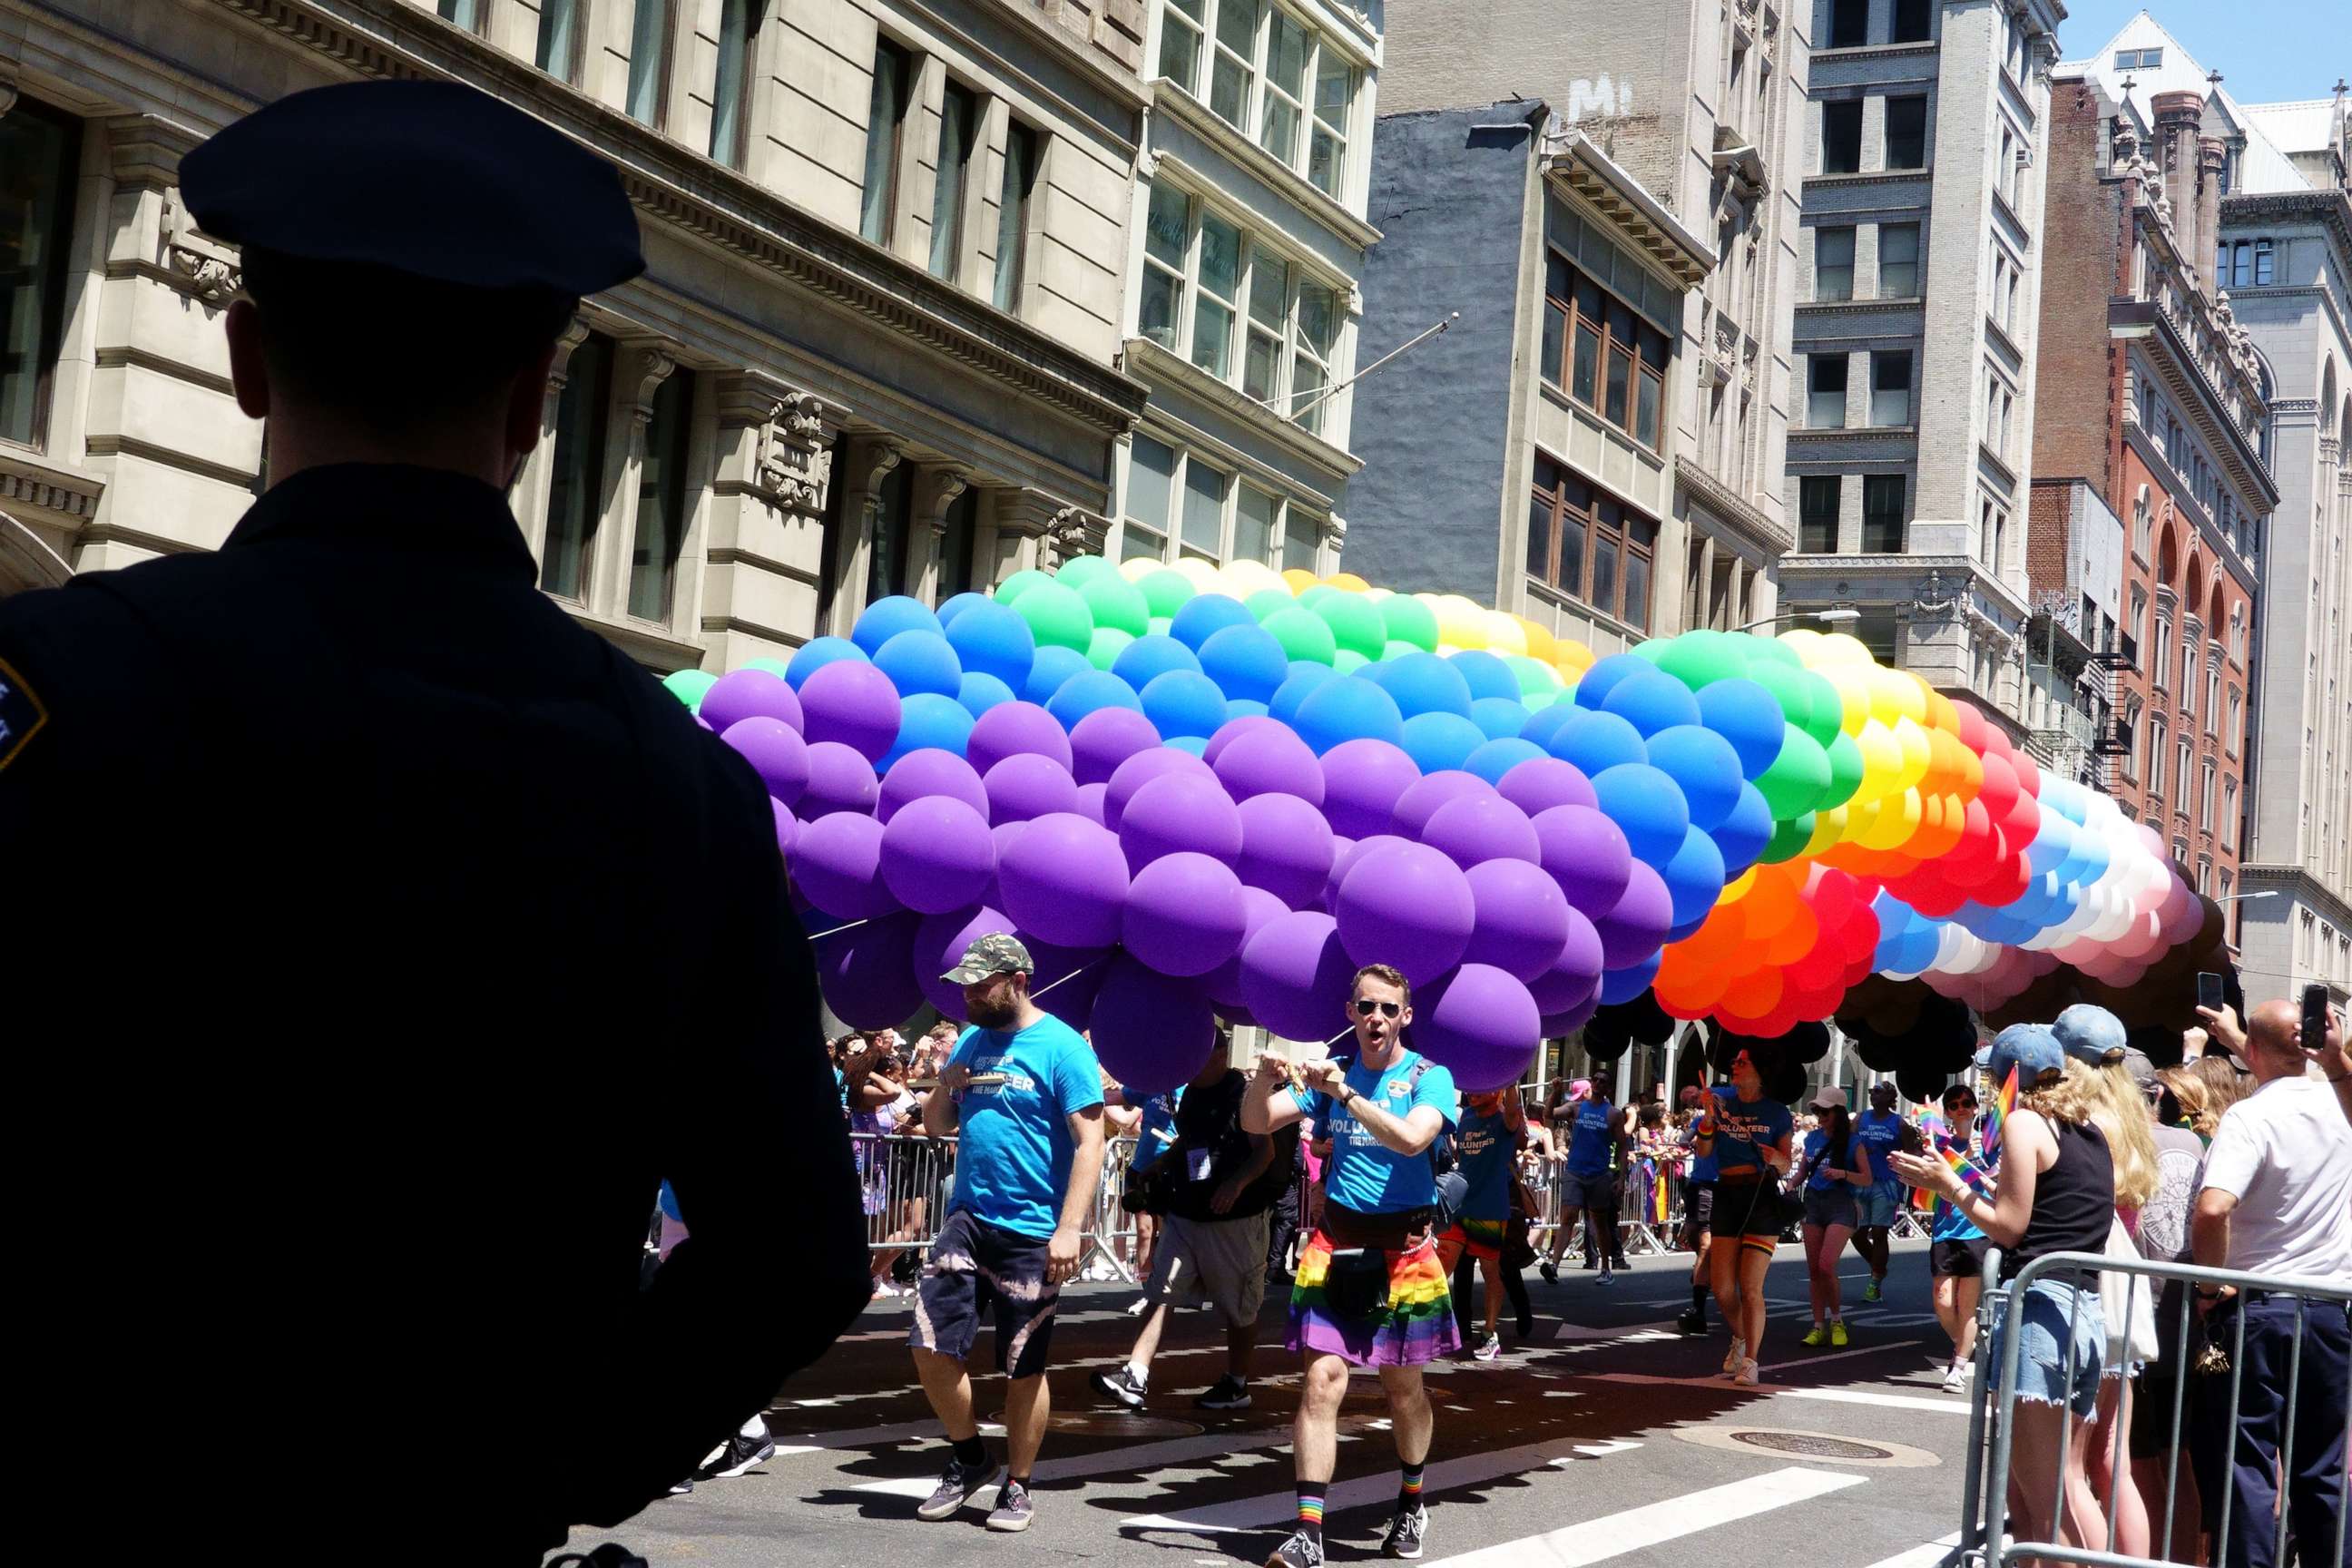 PHOTO: A police officer on duty during a pride event in New York City, June 26, 2022.